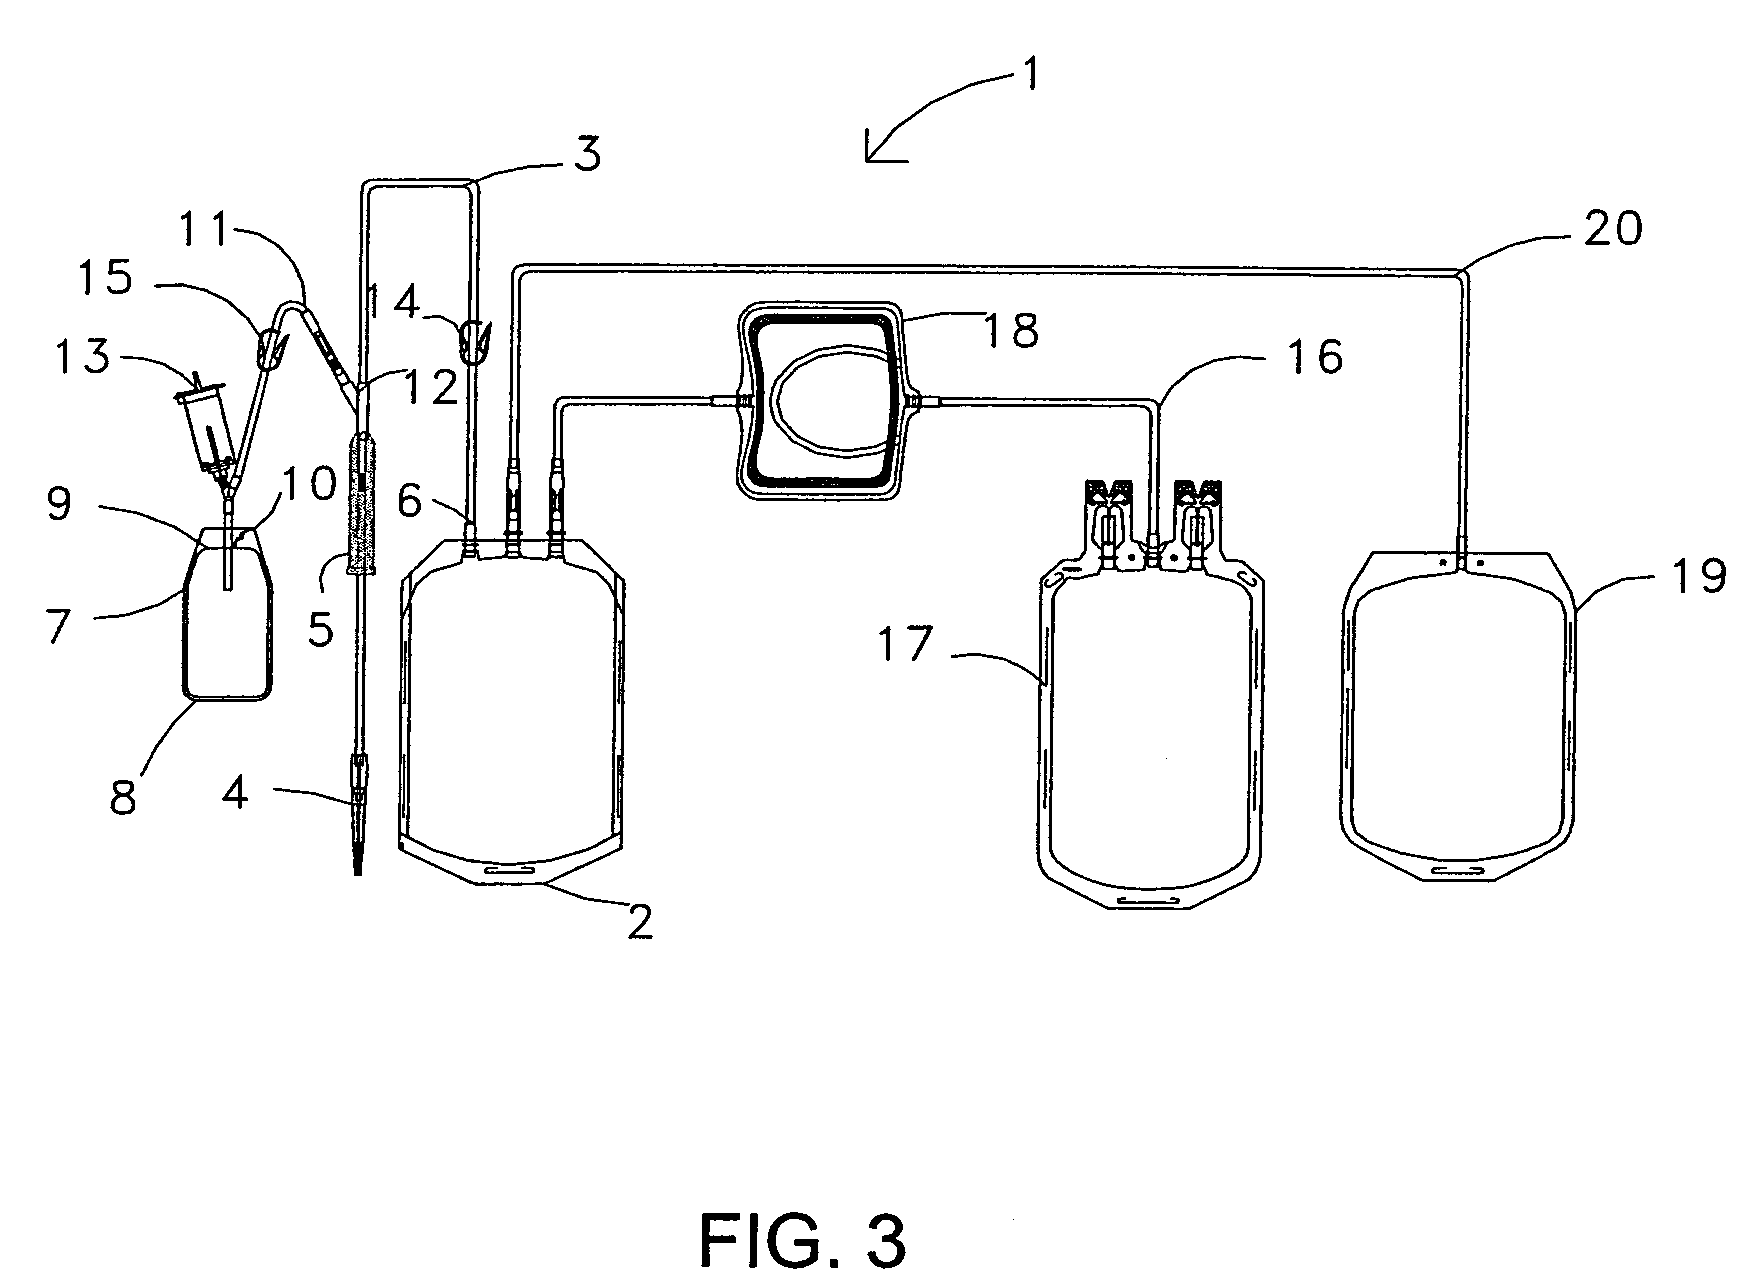 Bag system for collecting and sampling a biological fluid